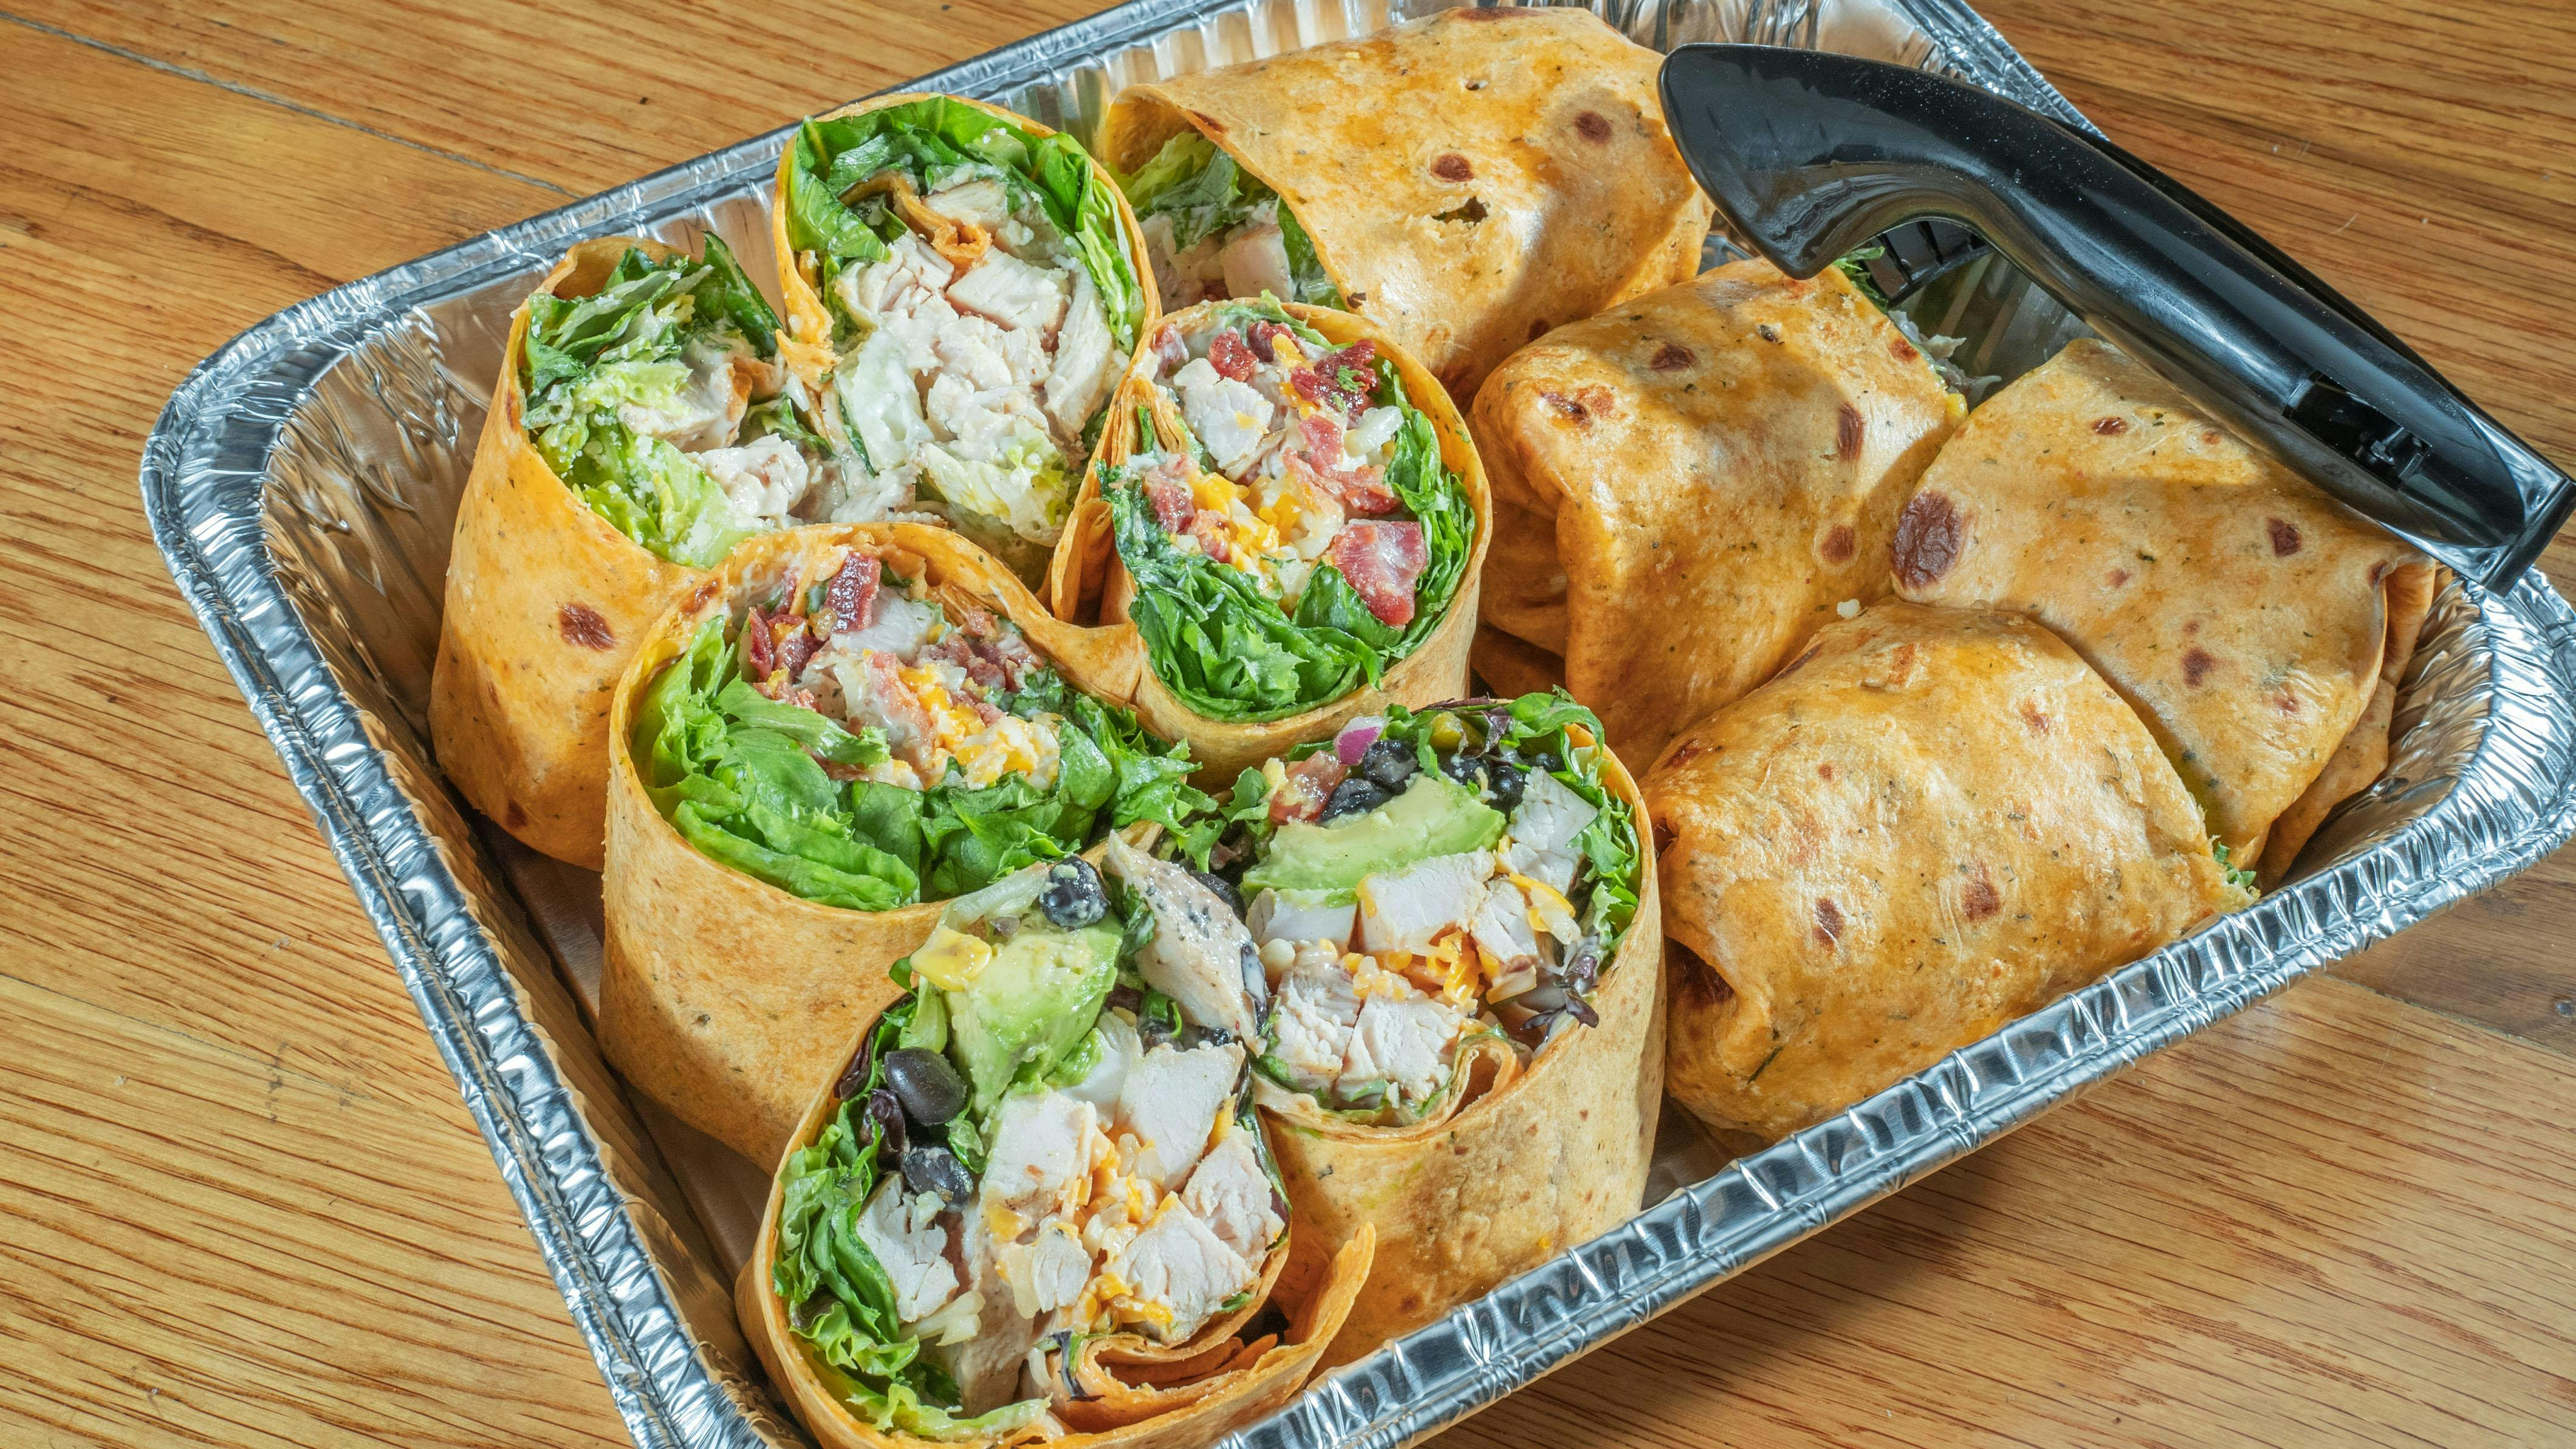 Chick Wrap Half Tray from Happy Chicks - Burnet Rd in Austin, TX